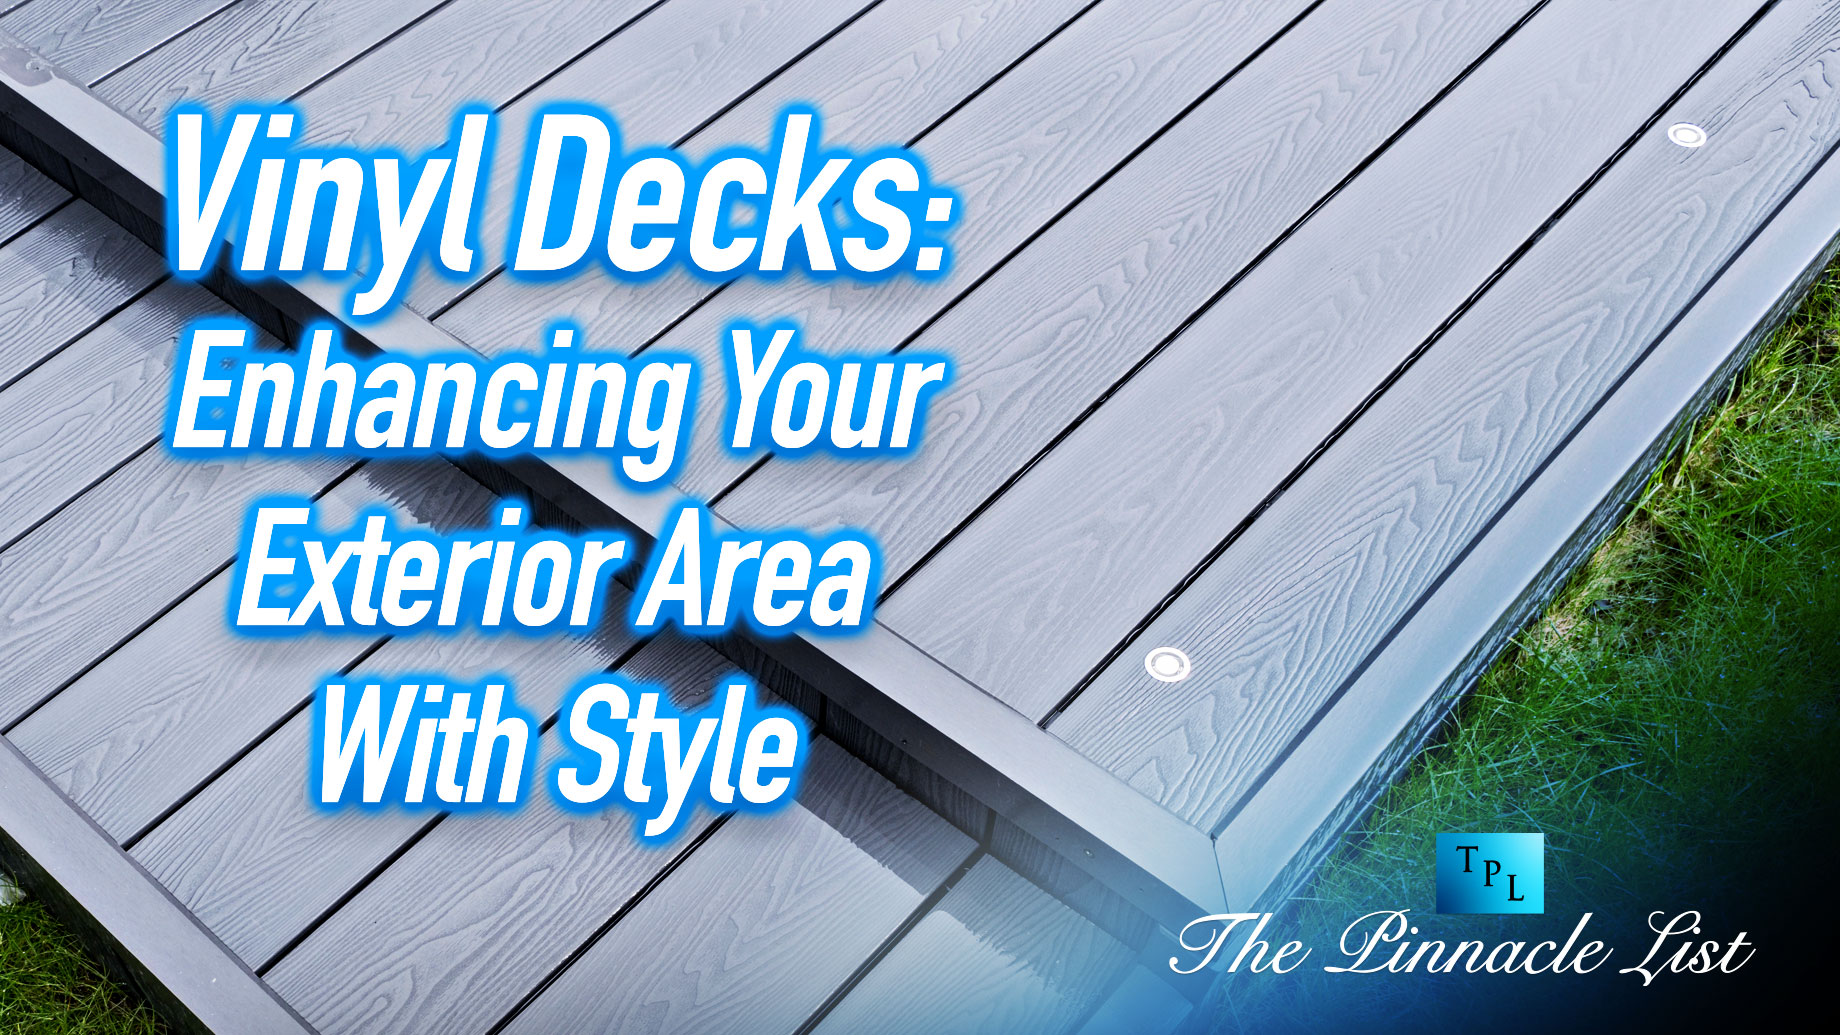 Vinyl Decks: Enhancing Your Exterior Area With Style